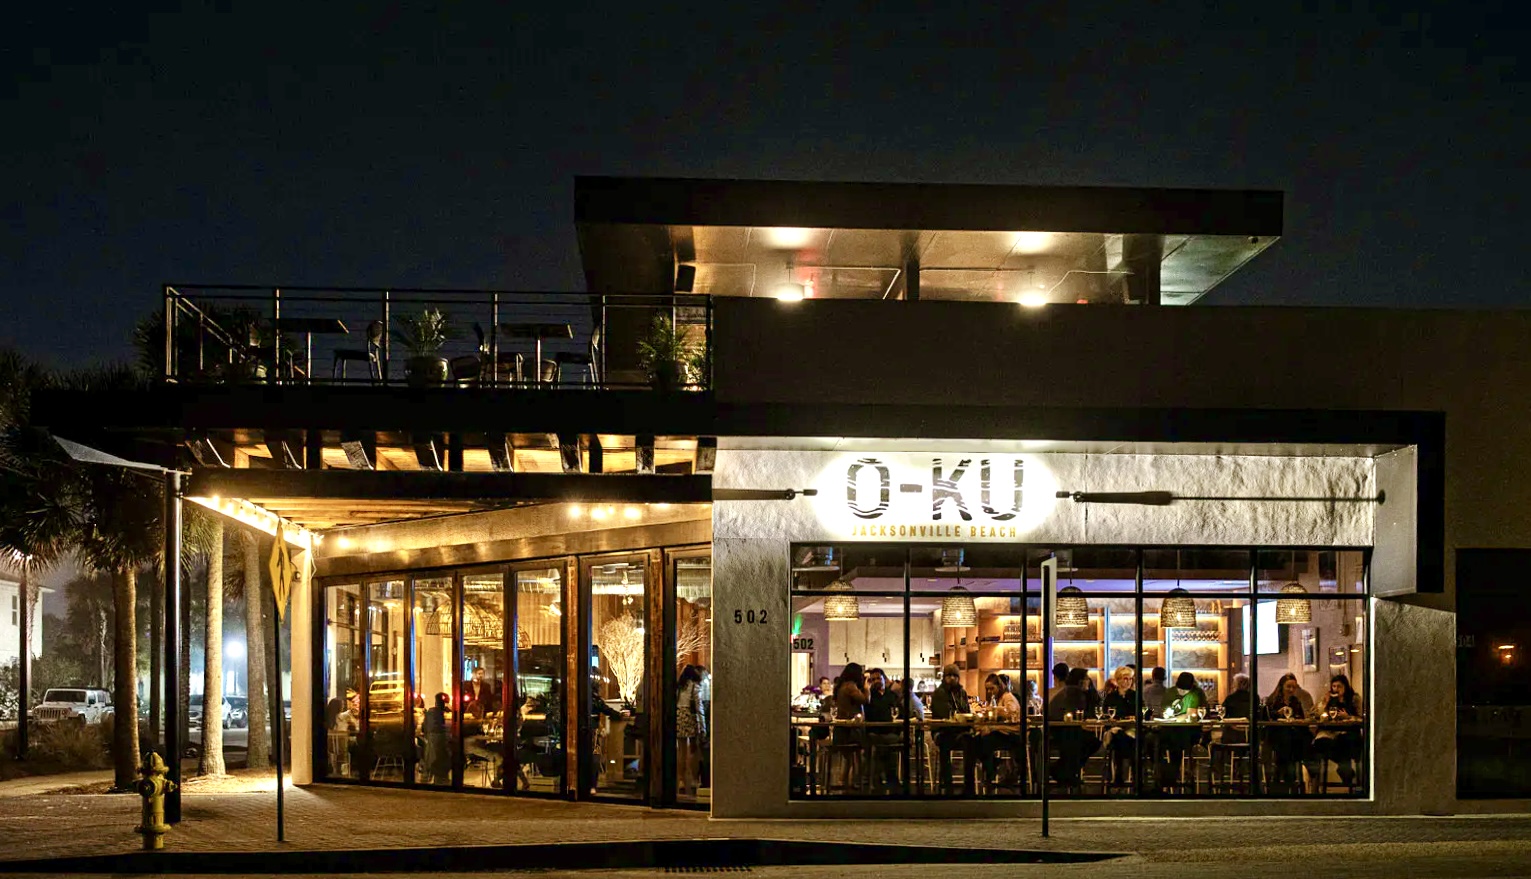 Exterior view of the O KU restaurant in the night